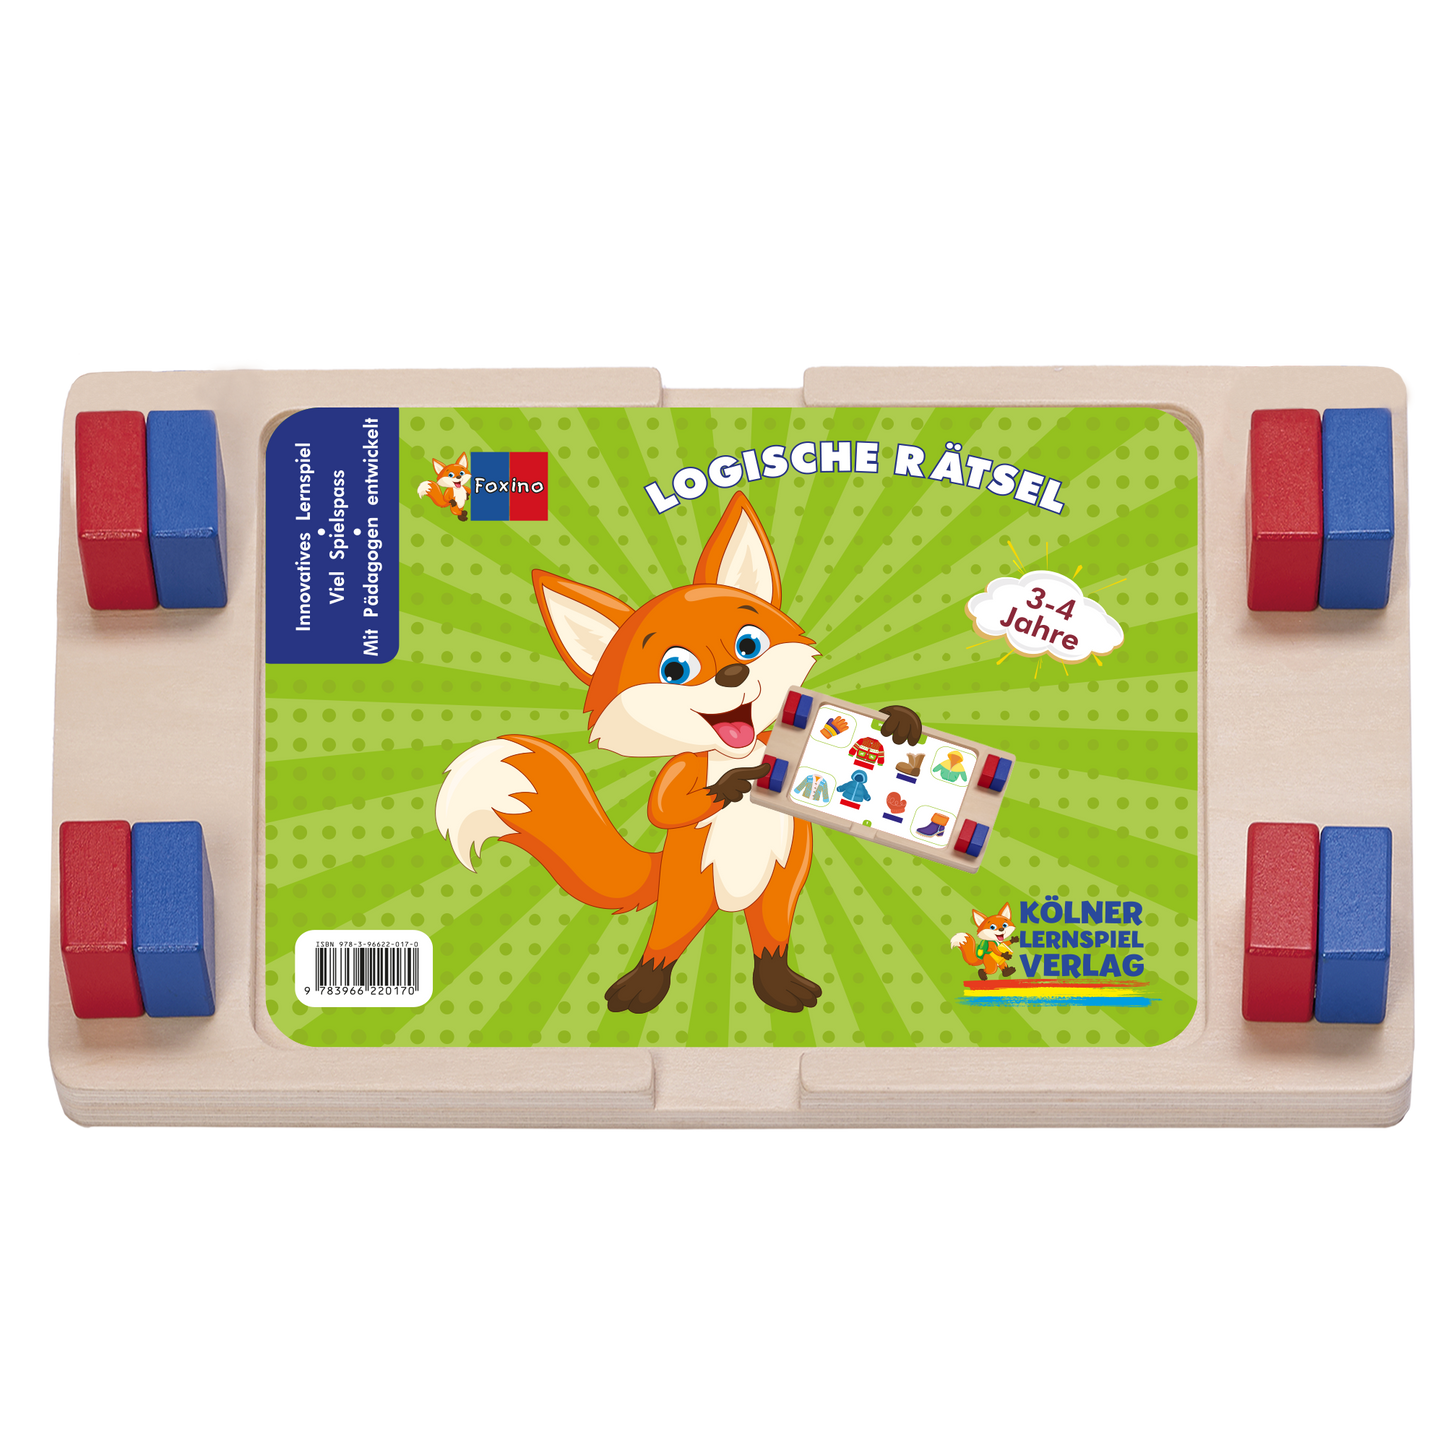 Foxino 3-4 years Logical puzzles